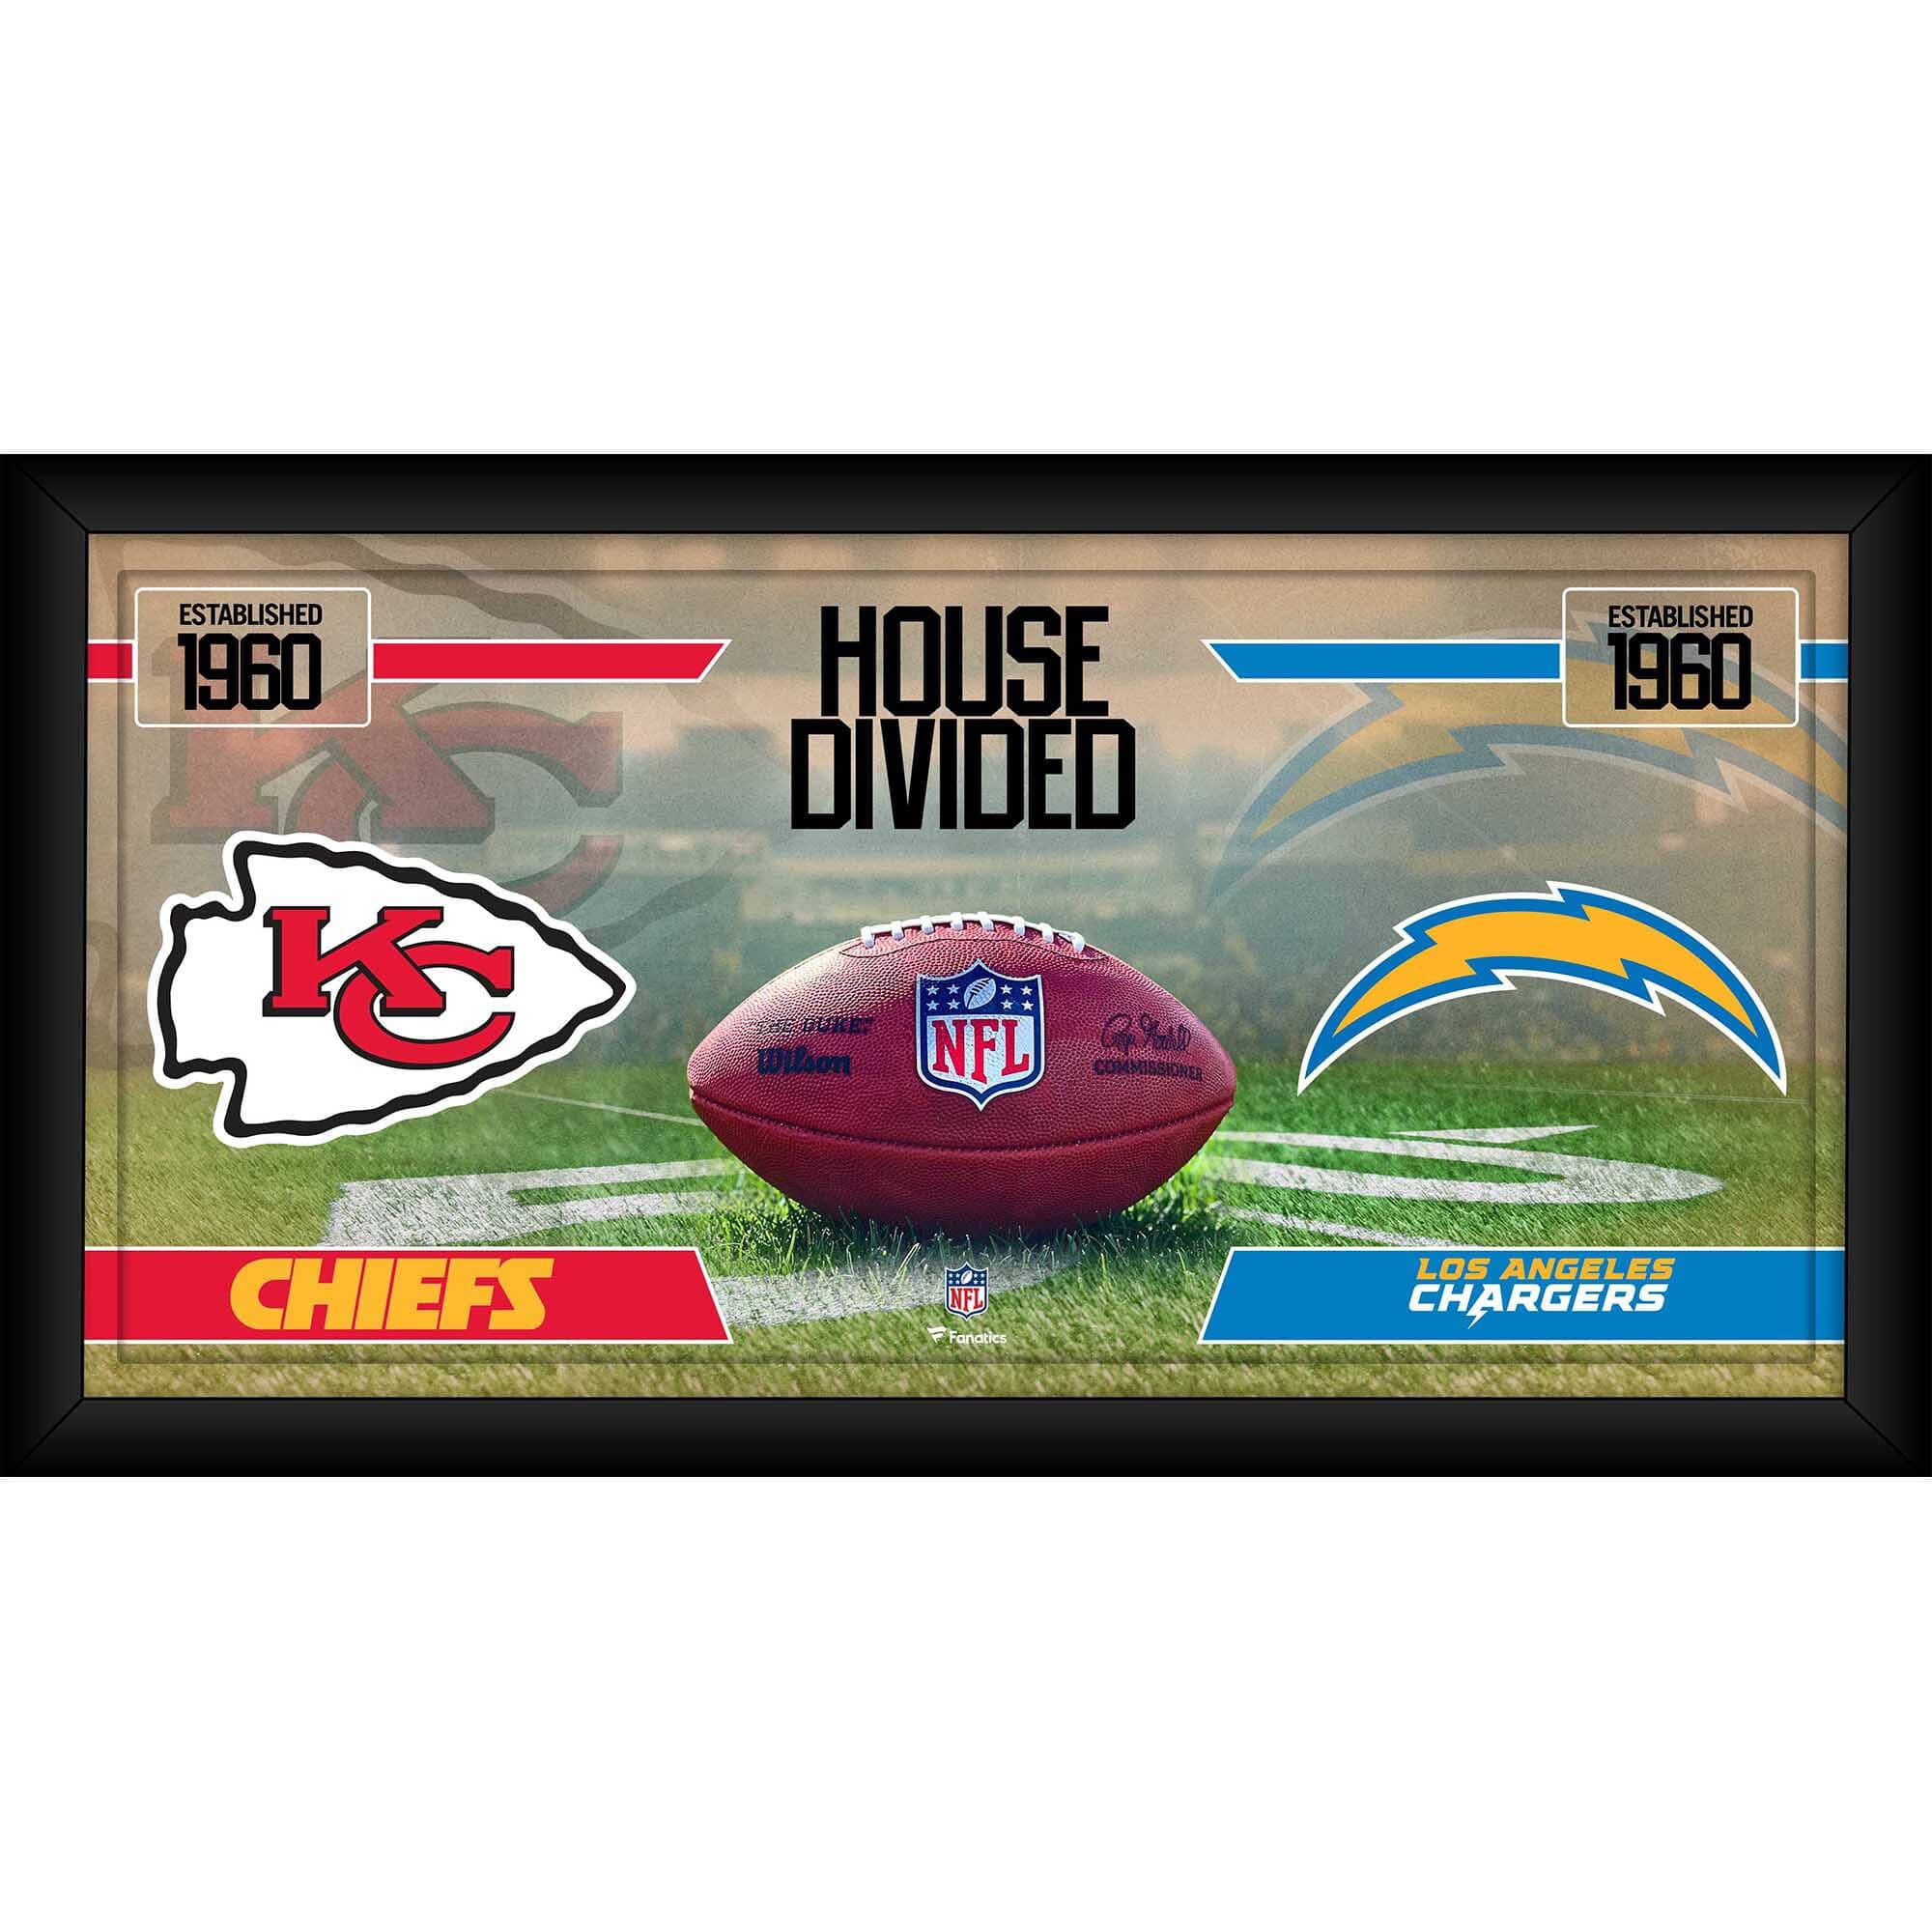 Kansas City Chiefs vs. Los Angeles Chargers Framed 10' x 20' House